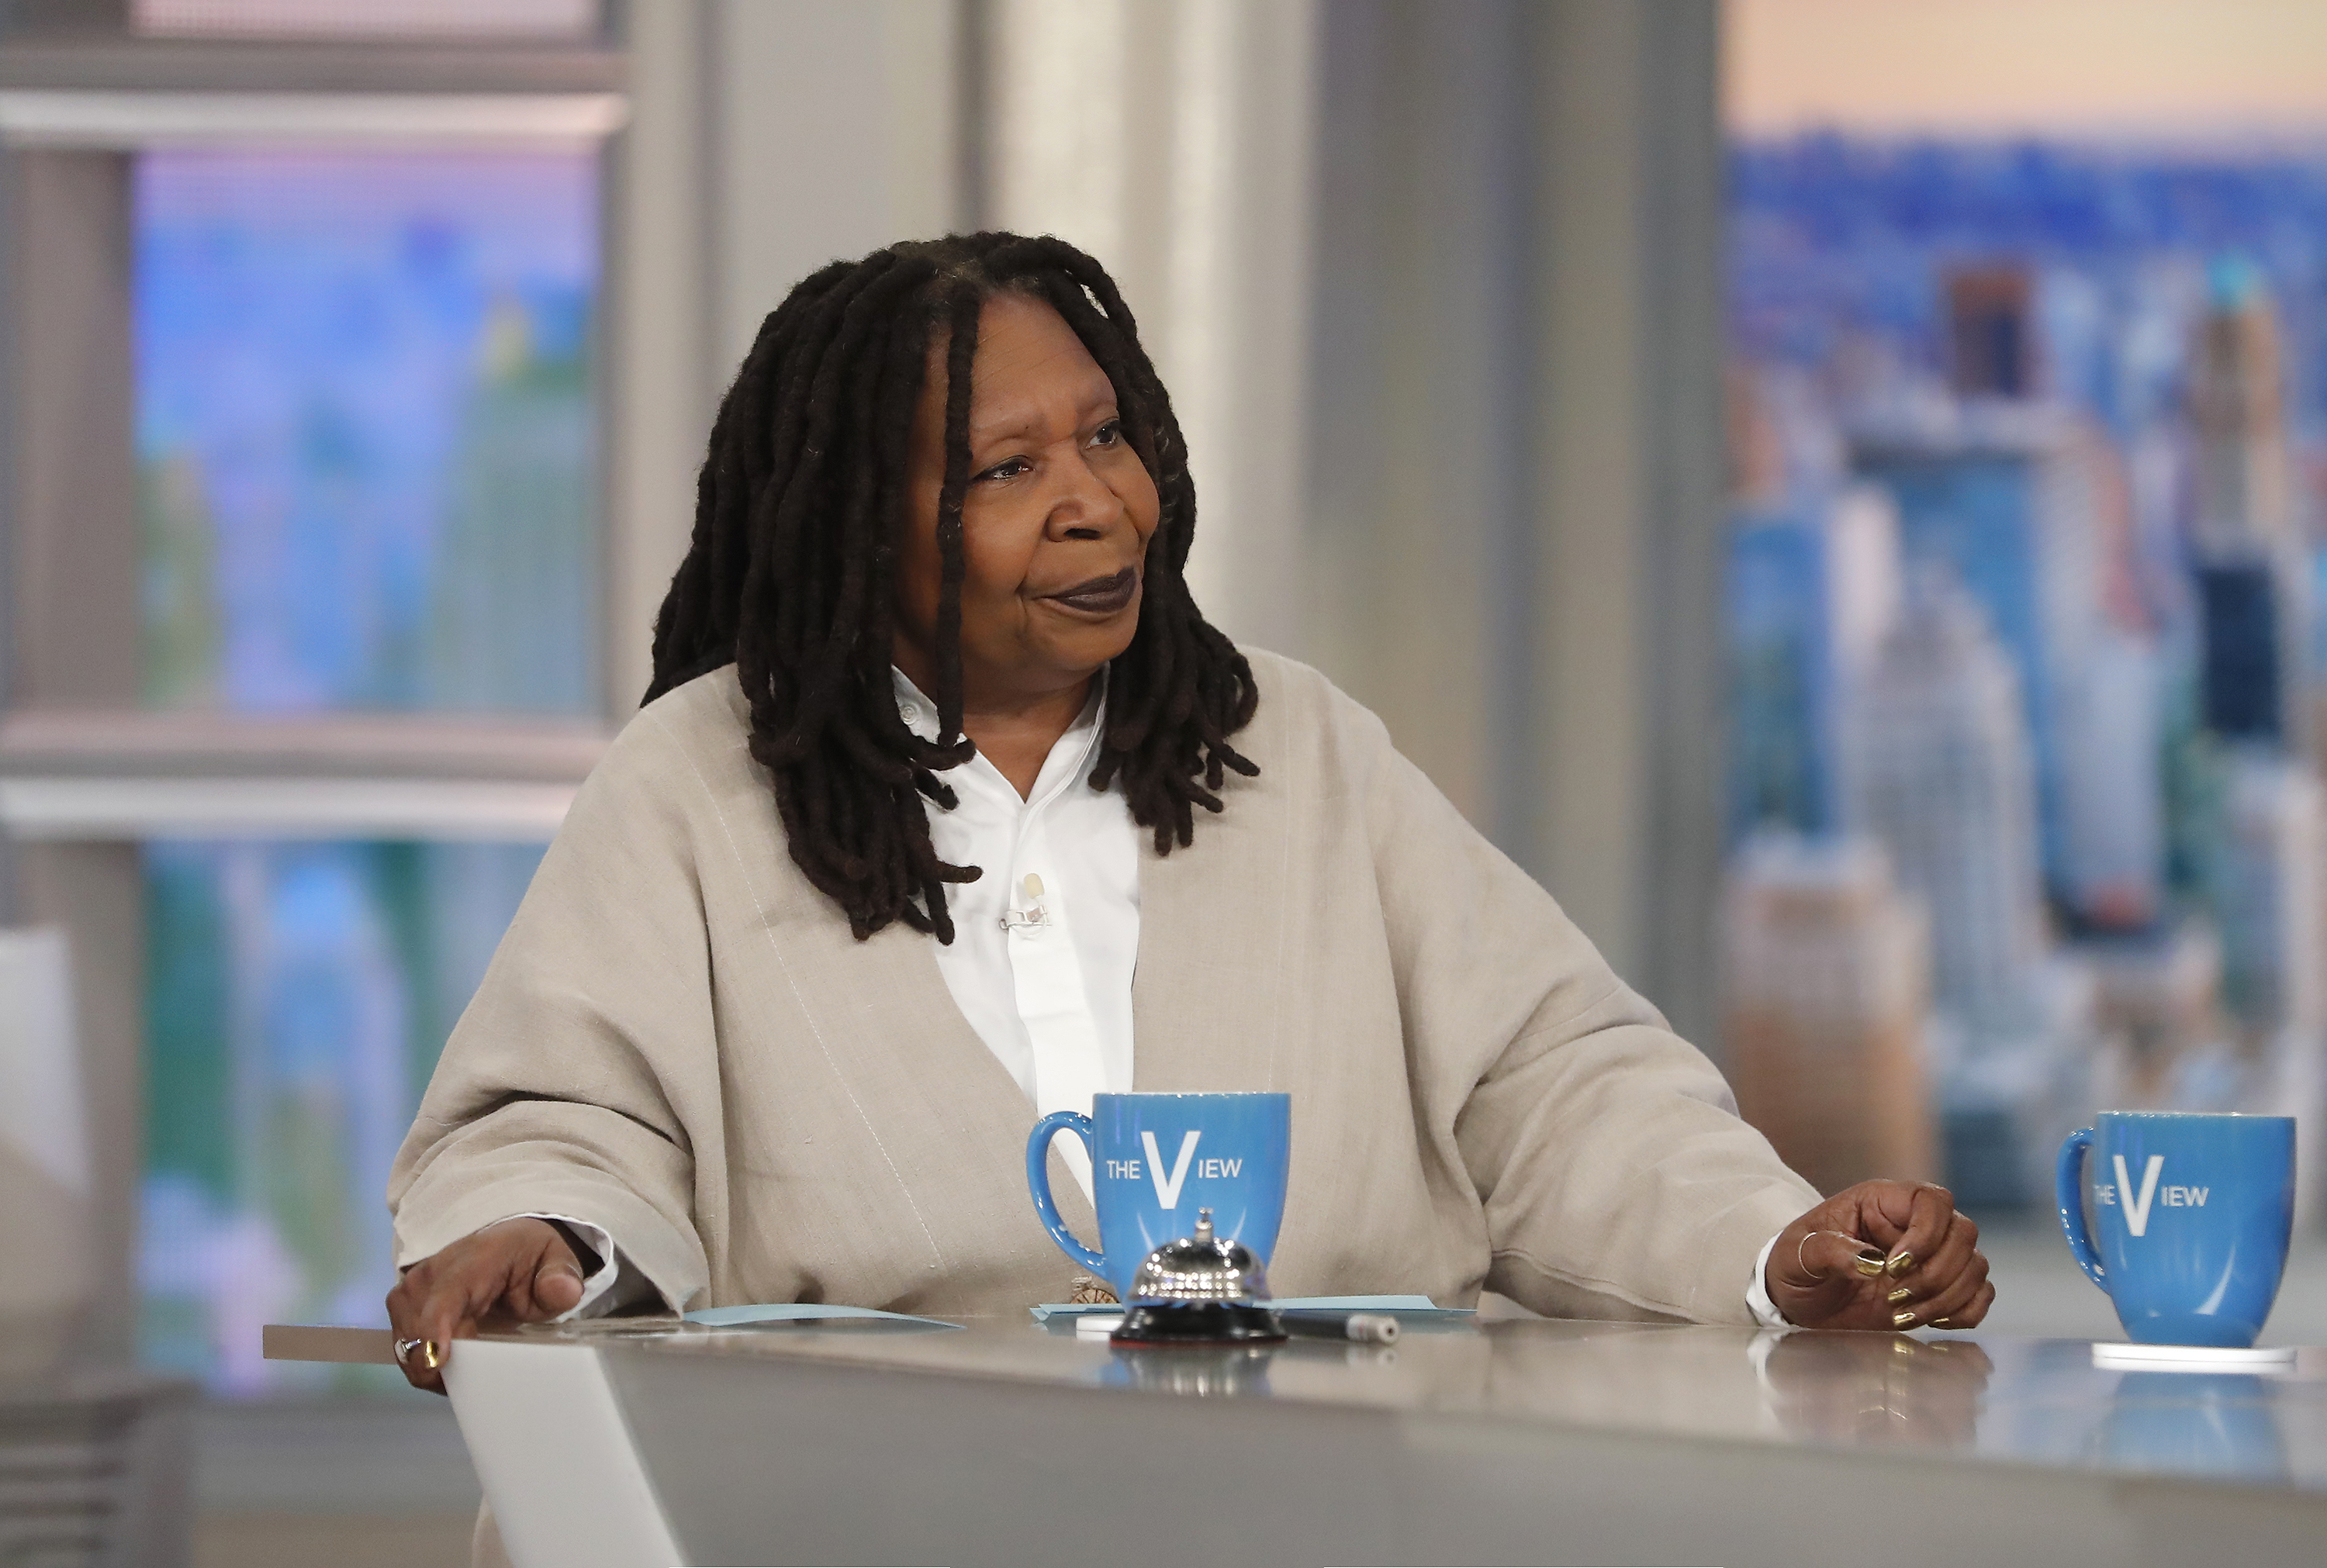 Whoopi Goldberg on an episode of "The View" on March 29, 2023. | Source: Getty Images